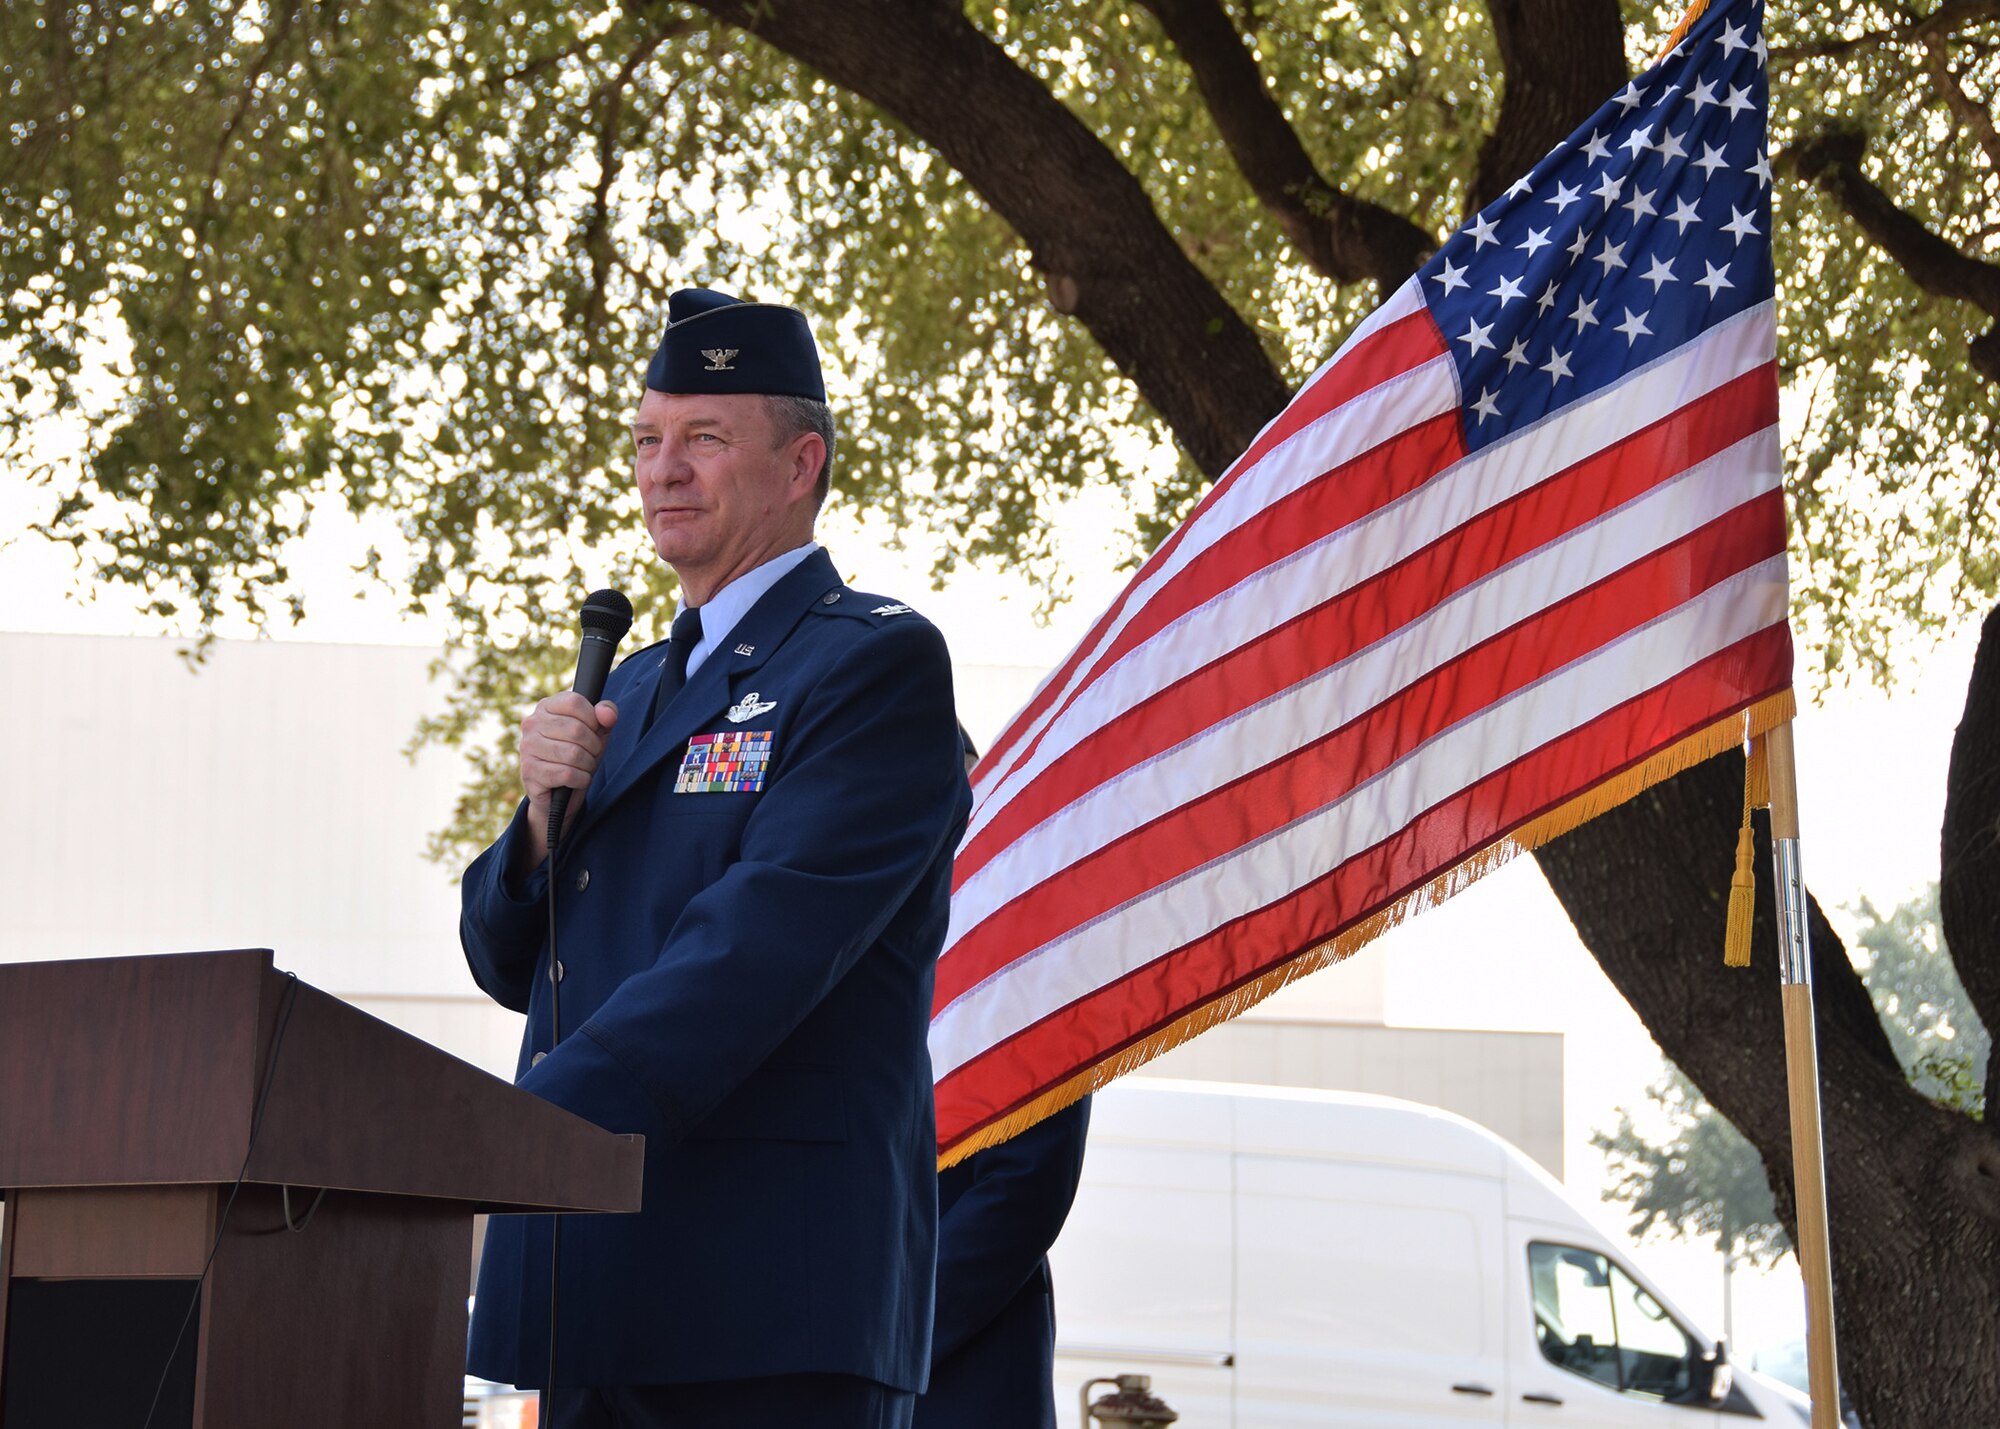 Col. Terry W. McClain, 433rd Airlift Wing commander, makes opening remarks during a remembrance and wreath laying ceremony for mission BRAVO-12 Aug. 28, 2020 at Joint Base San Antonio-Lackland, Texas.